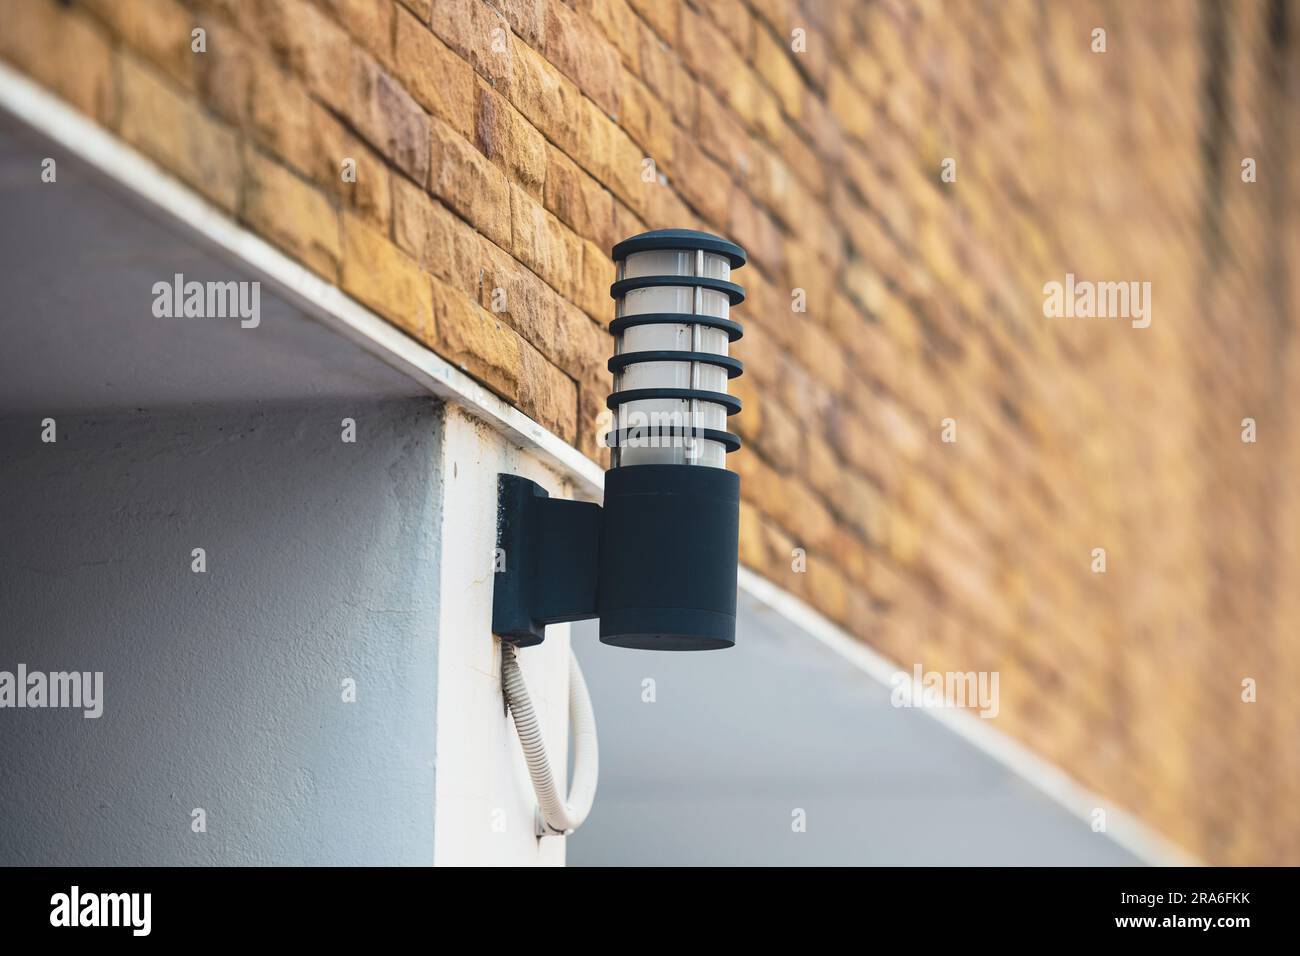 outdoor lighting exterior outdoor lamp decoration wall mount modern design for building. Stock Photo